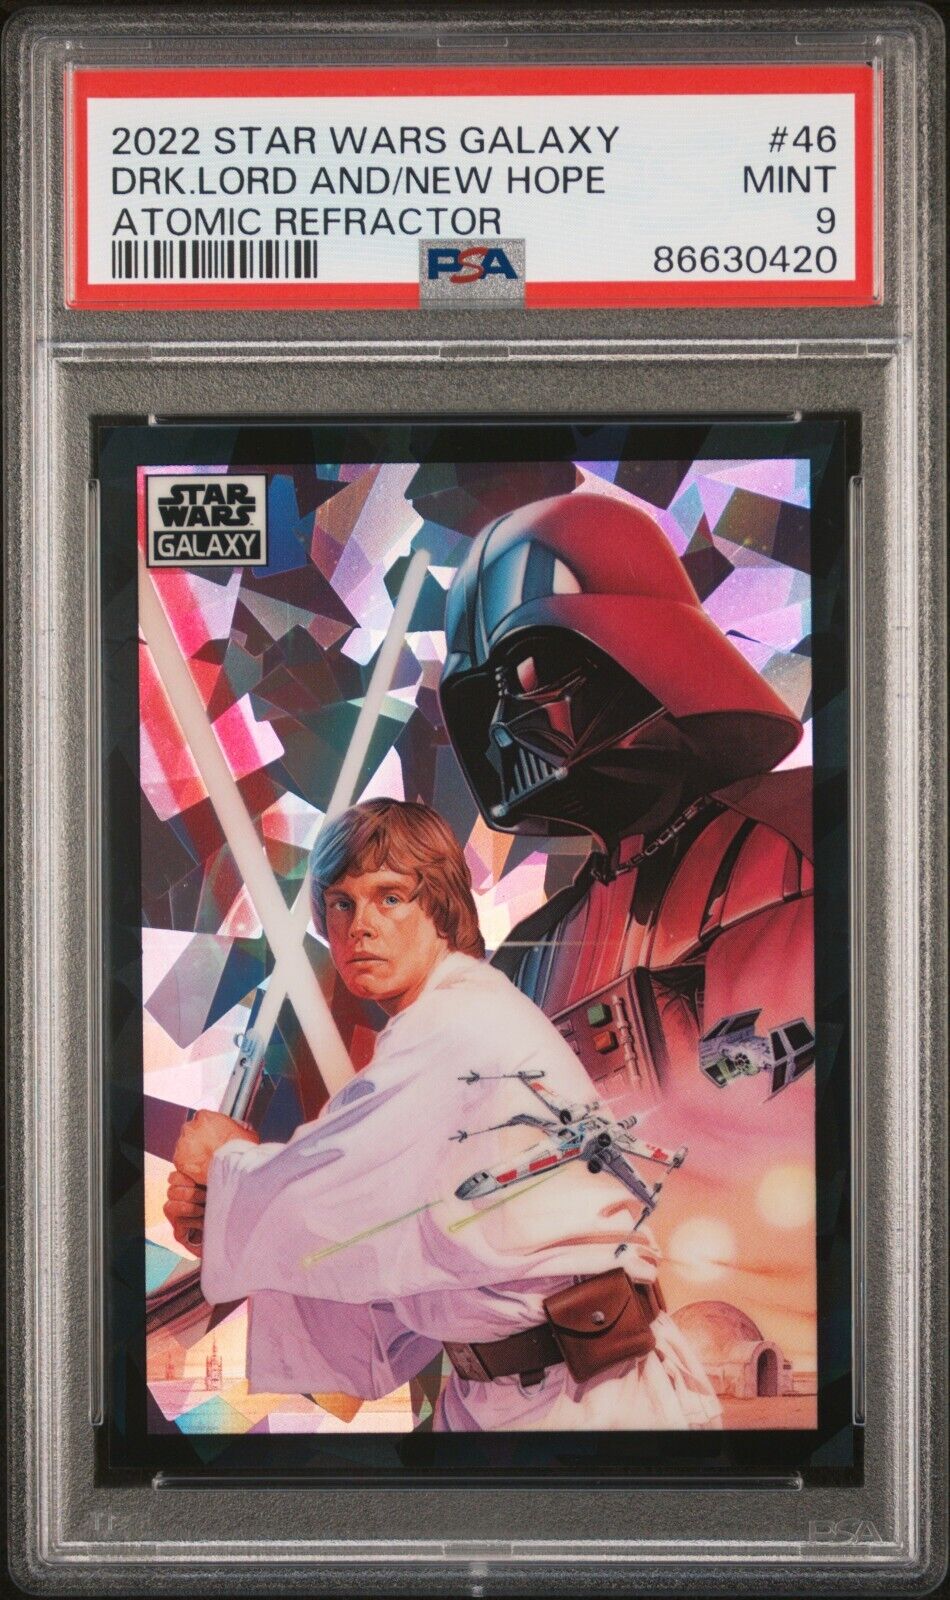 PSA 9 2022 DARK LORD AND A NEW HOPE ATOMIC REFRACTOR TOPPS STAR WARS GALAXY